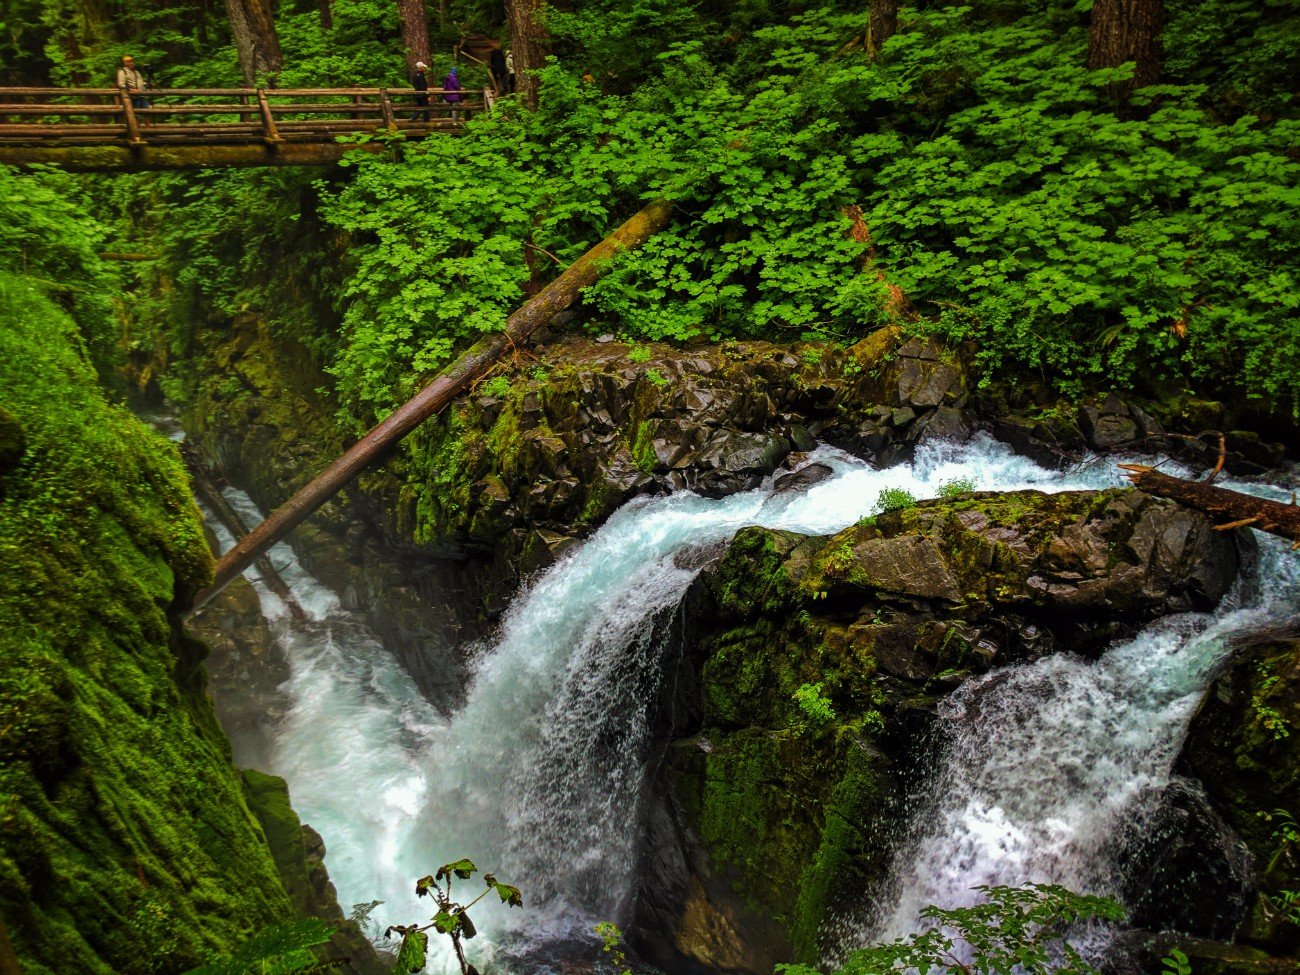 Hiking Sol Duc Falls and the northern rainforest of Olympic National Park